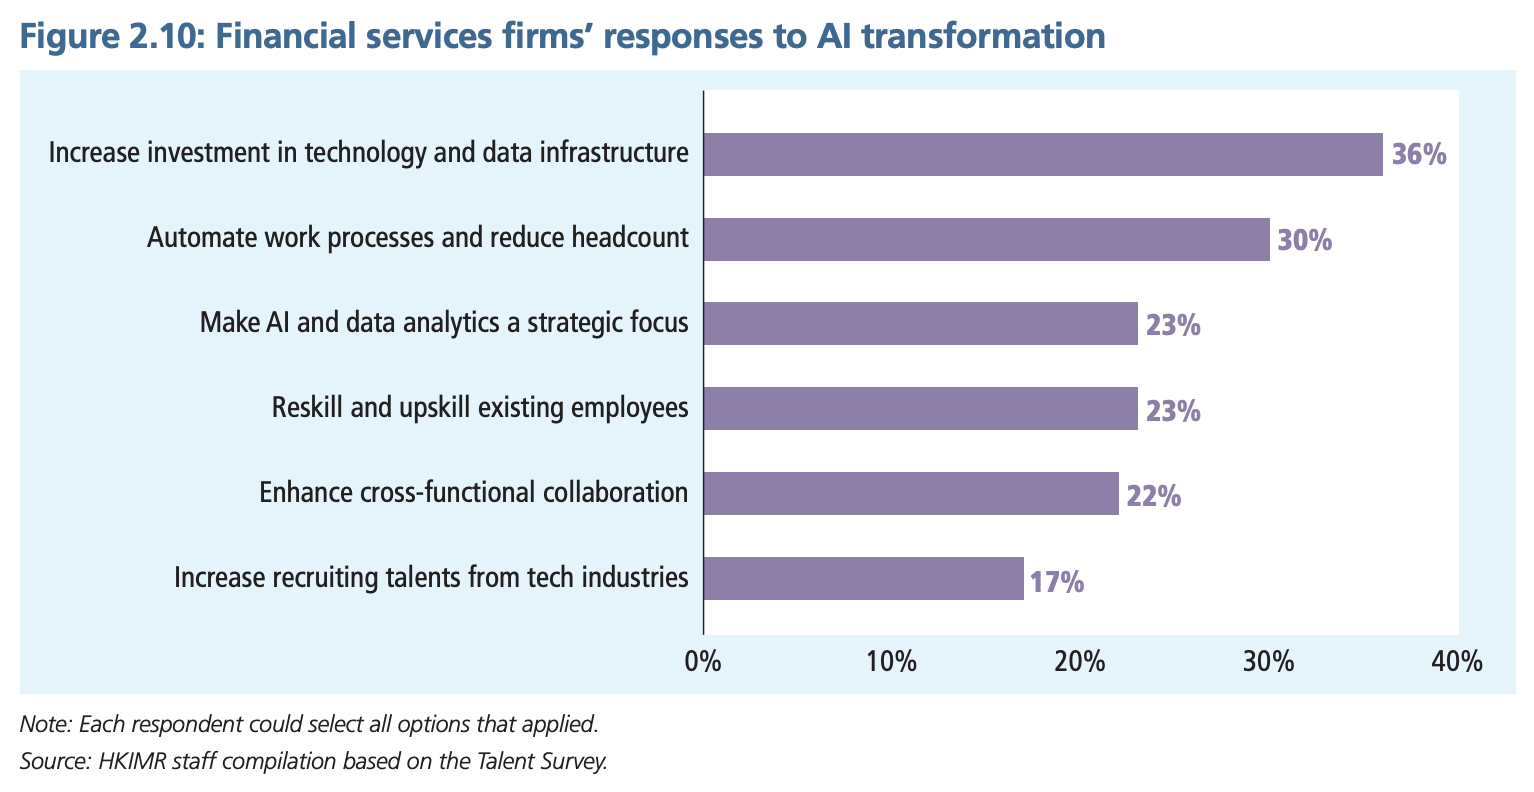 Financial services firms' responses to AI transformation, Source: Advancing Talent Development in Financial Services: Emerging Global Trends and Their Impact on Hong Kong